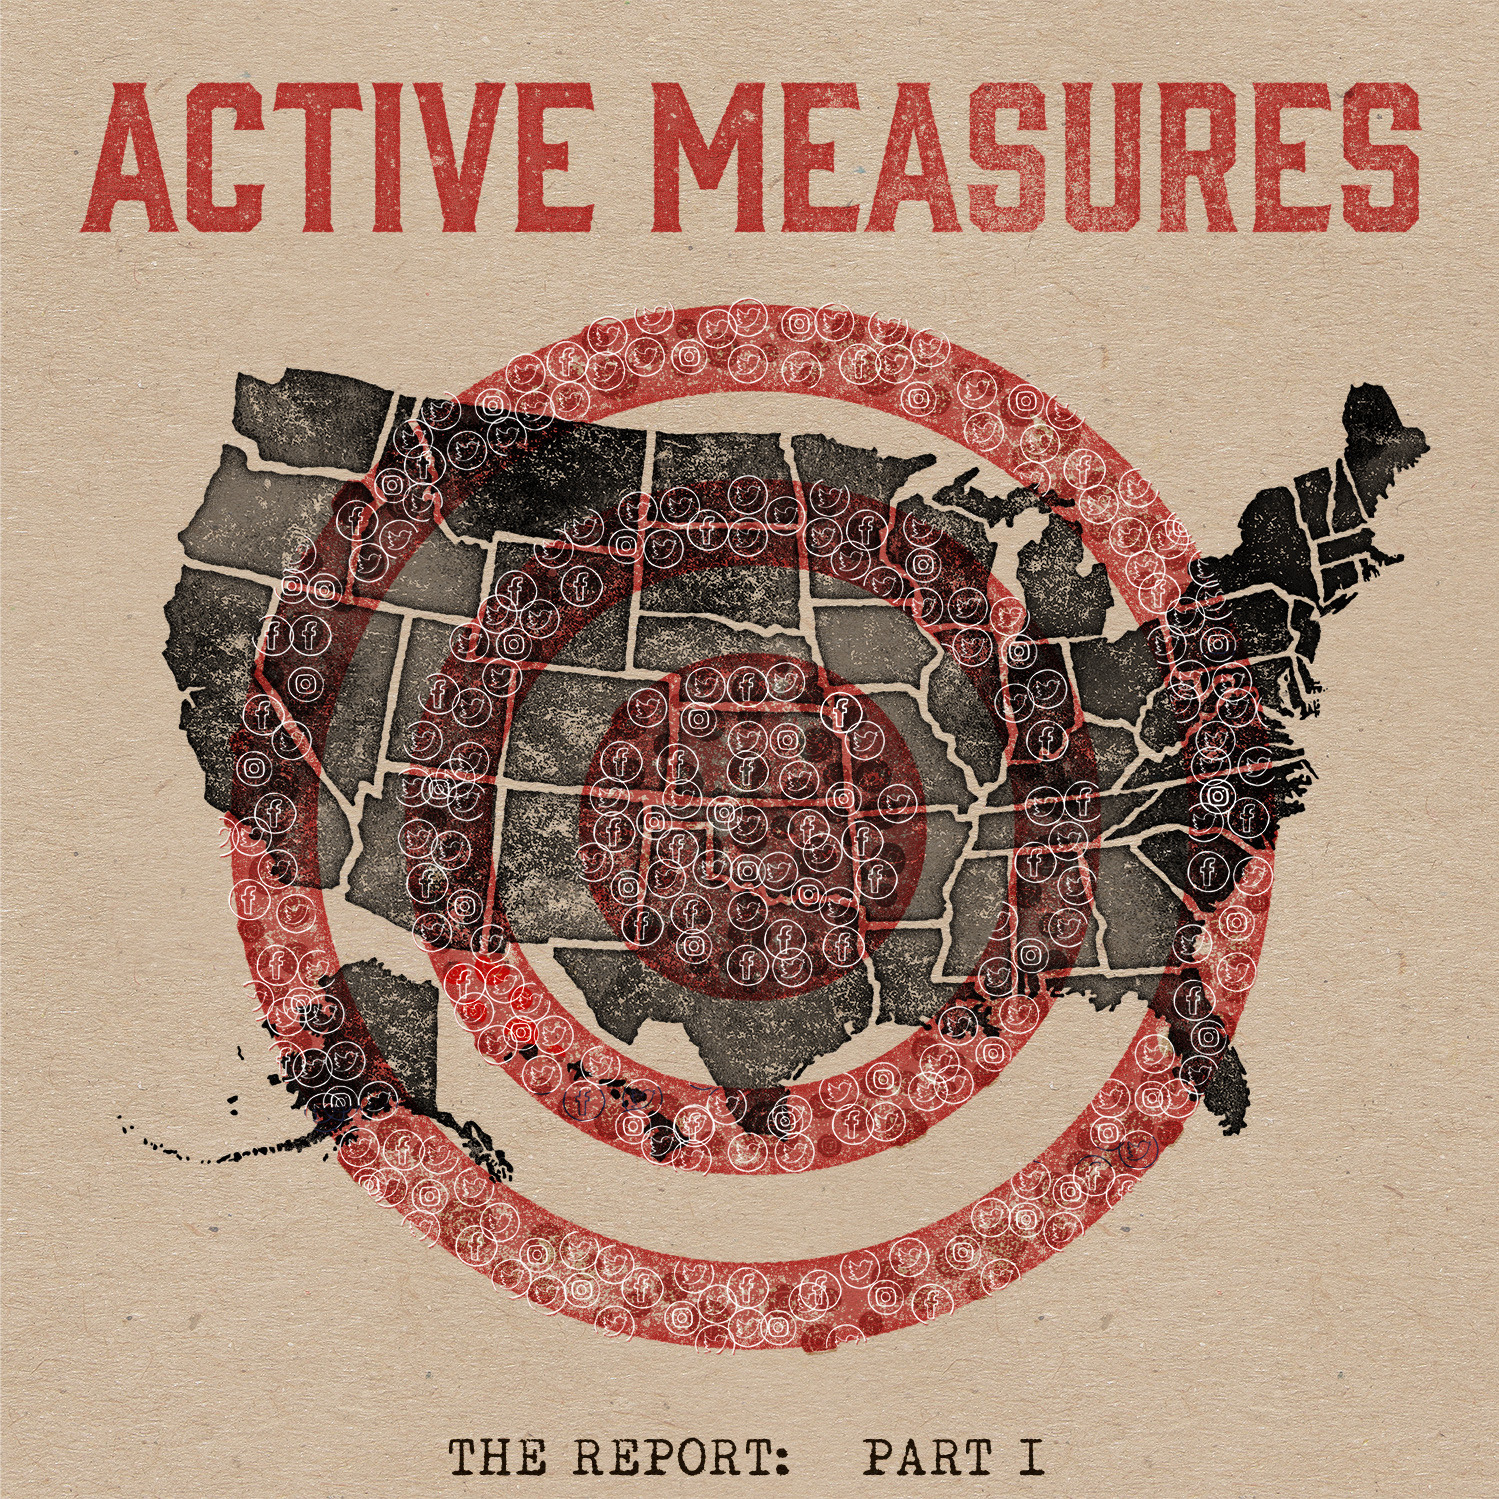 The Report Part I: Active Measures